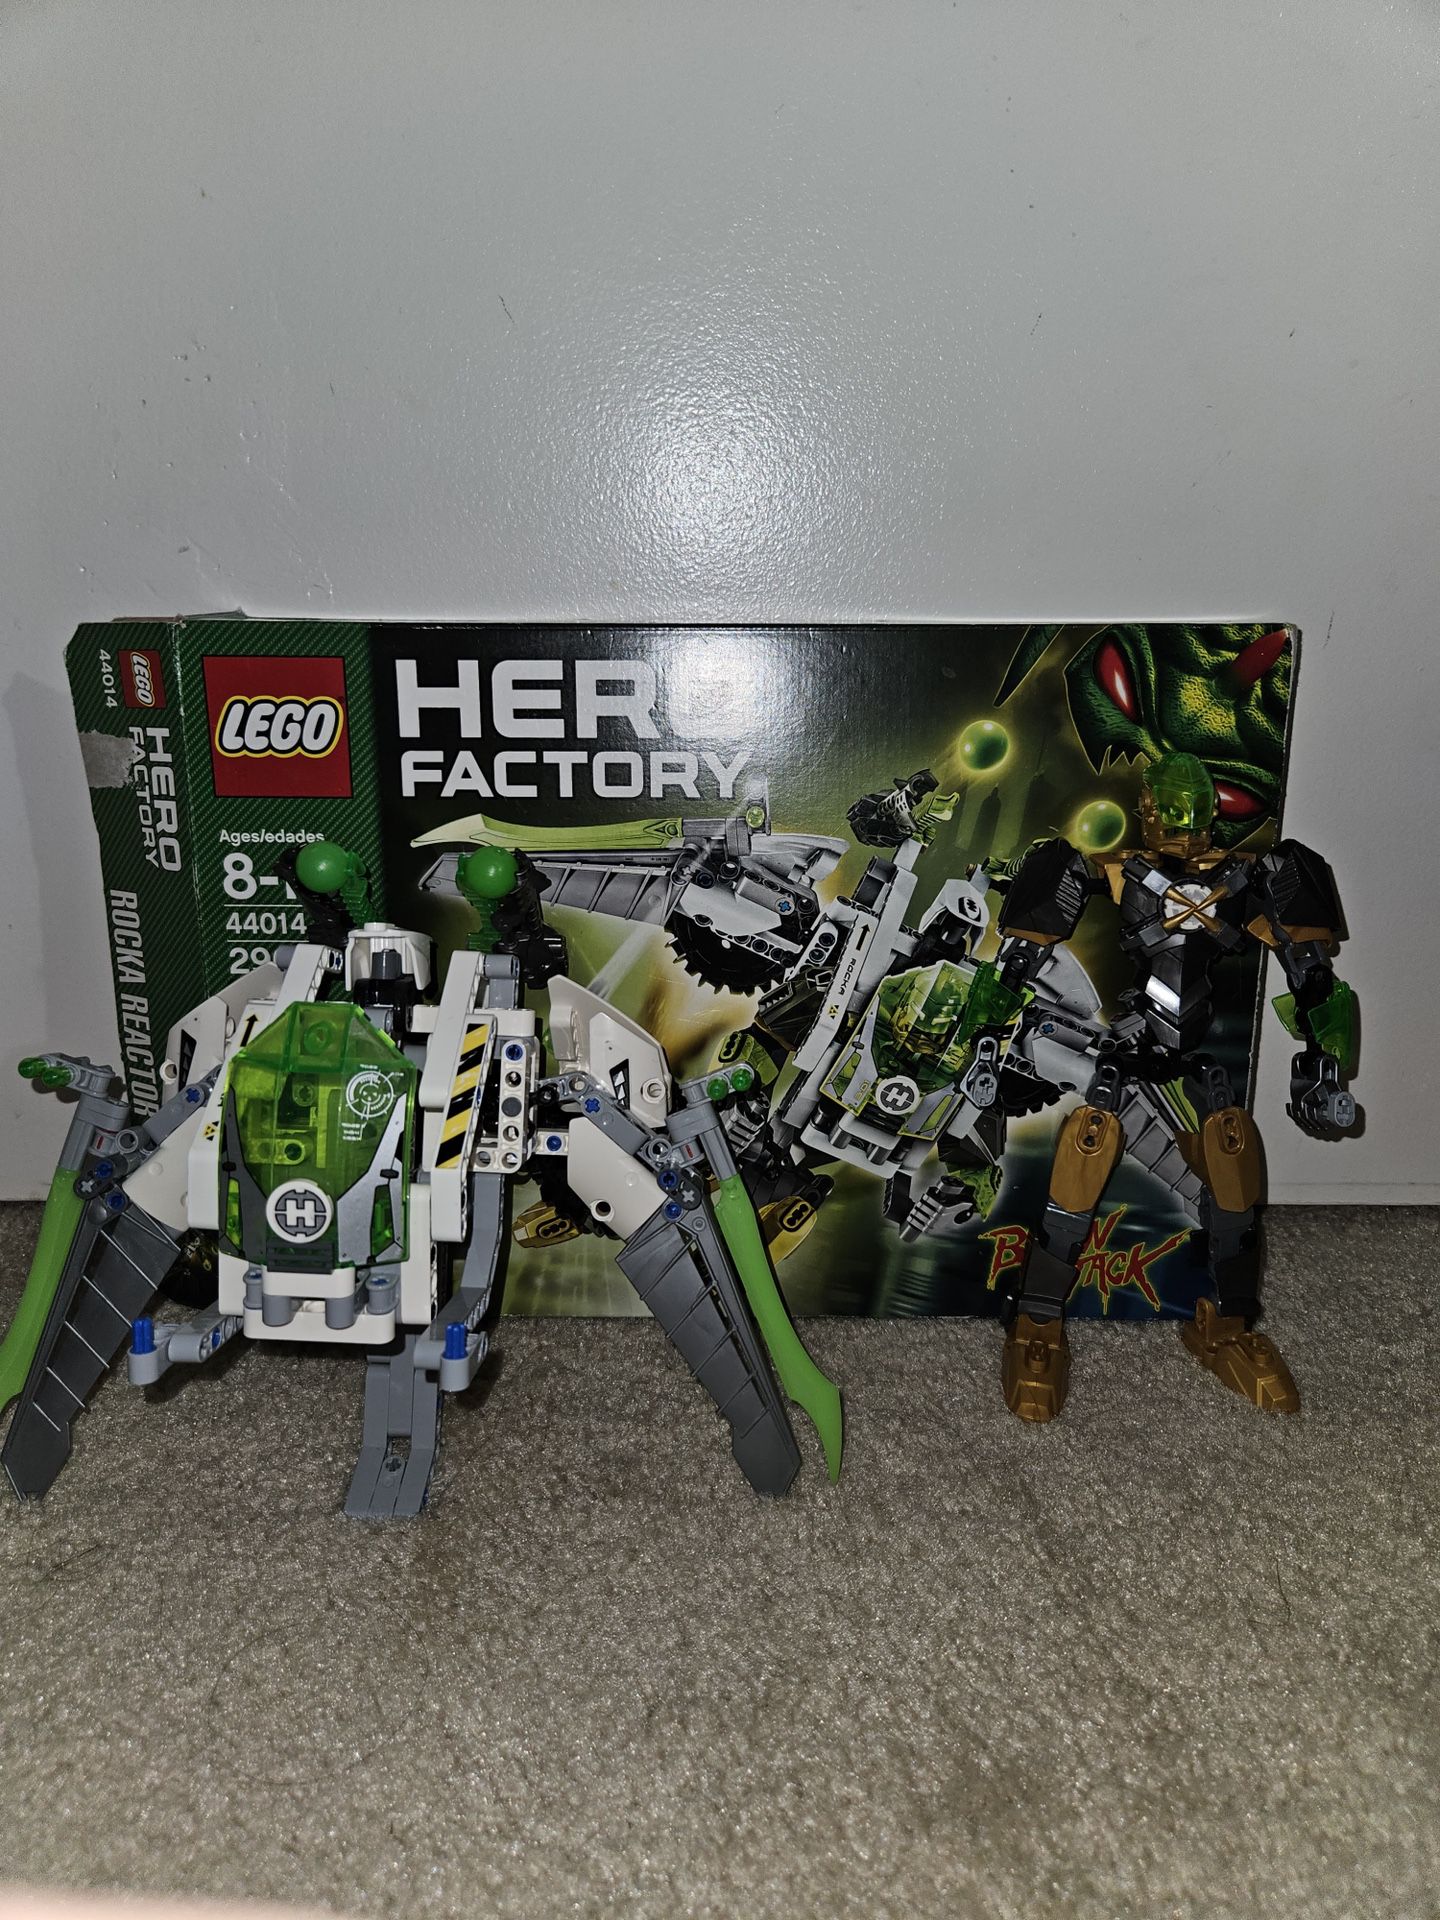 Lego Hero Factory/Bionicle for Sale in Rialto, CA - OfferUp